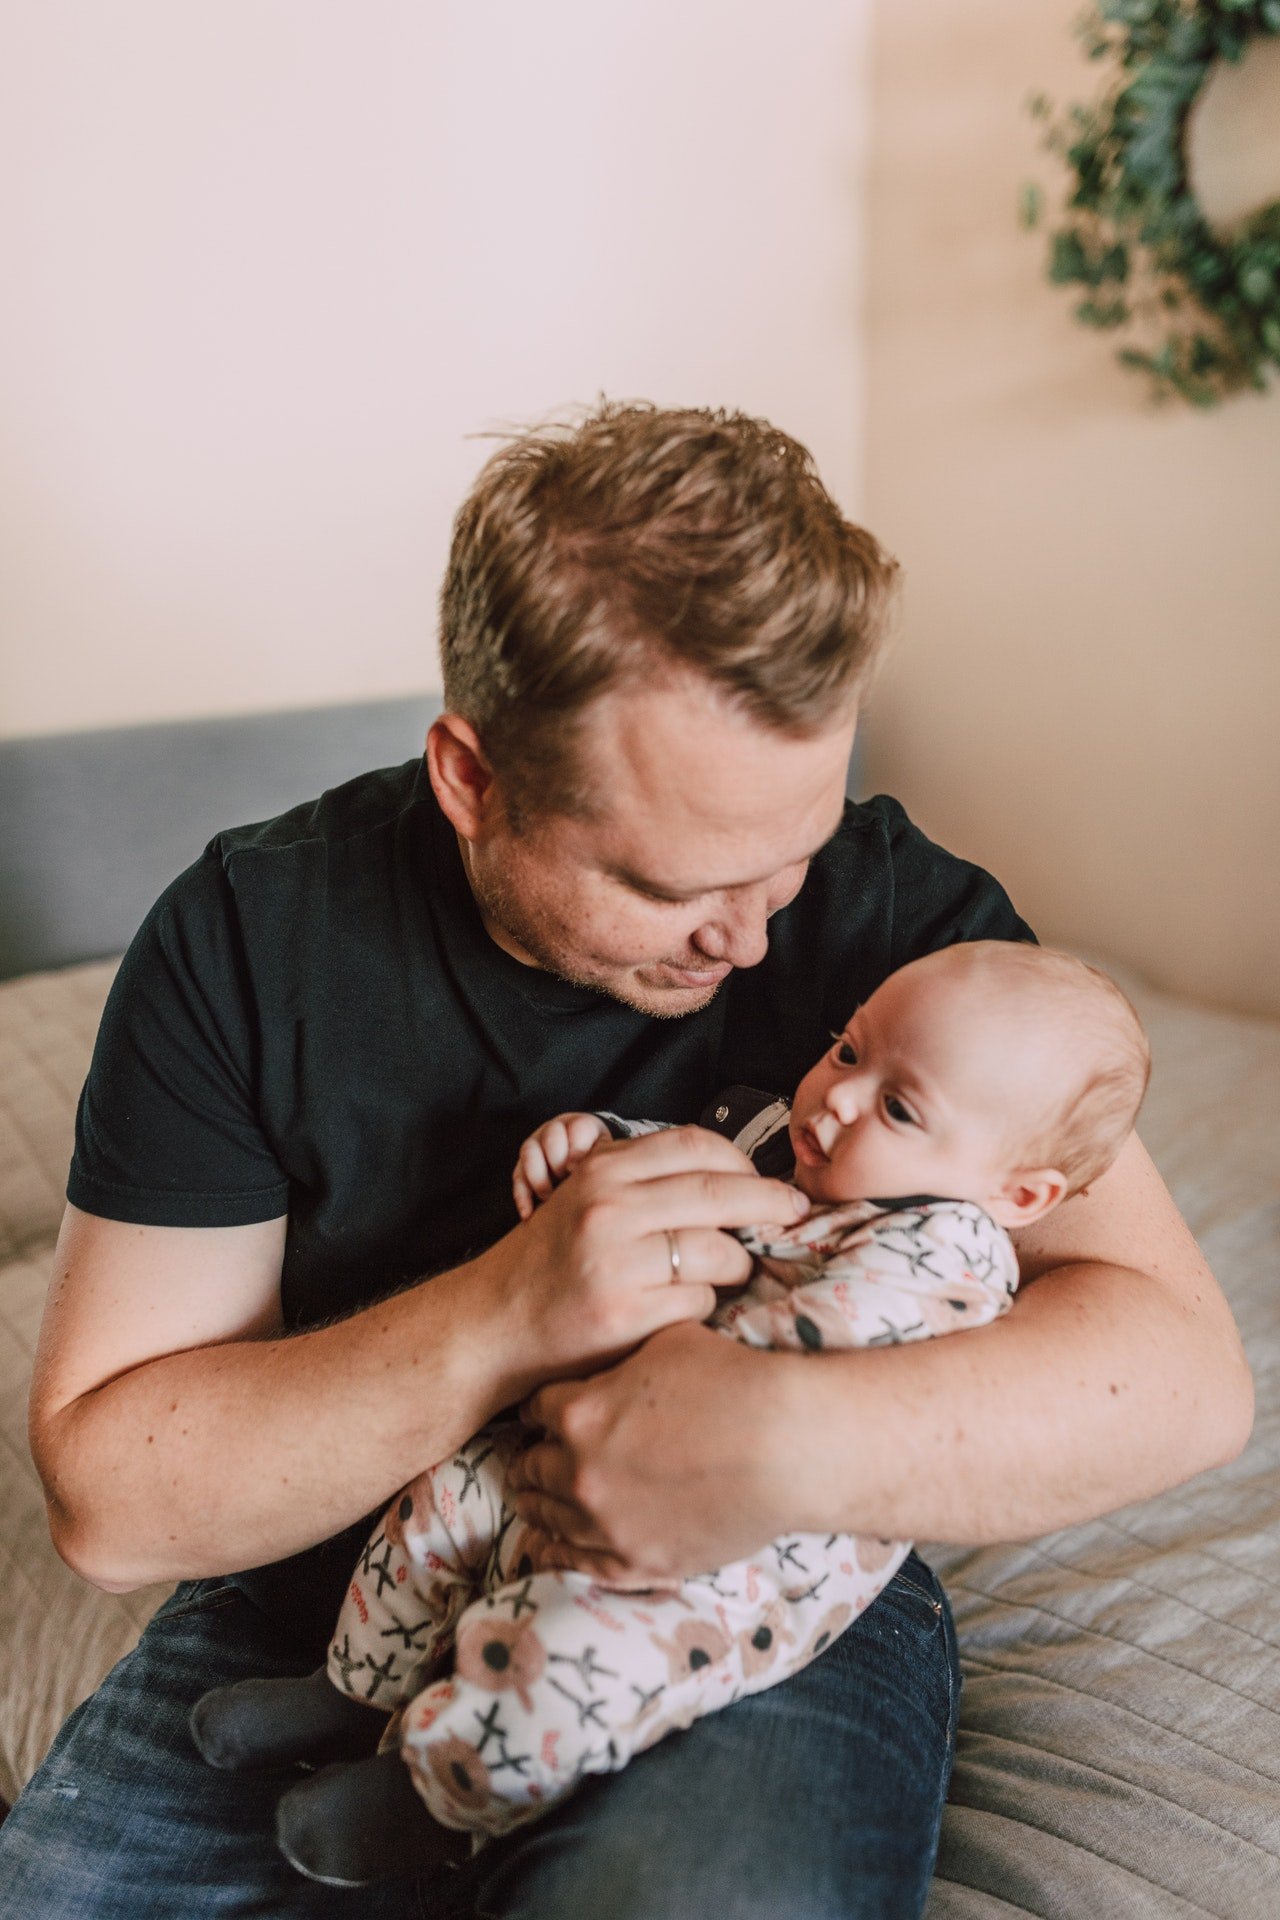 Simon fell in love with the baby immediately and decided to adopt her. | Source: Pexels